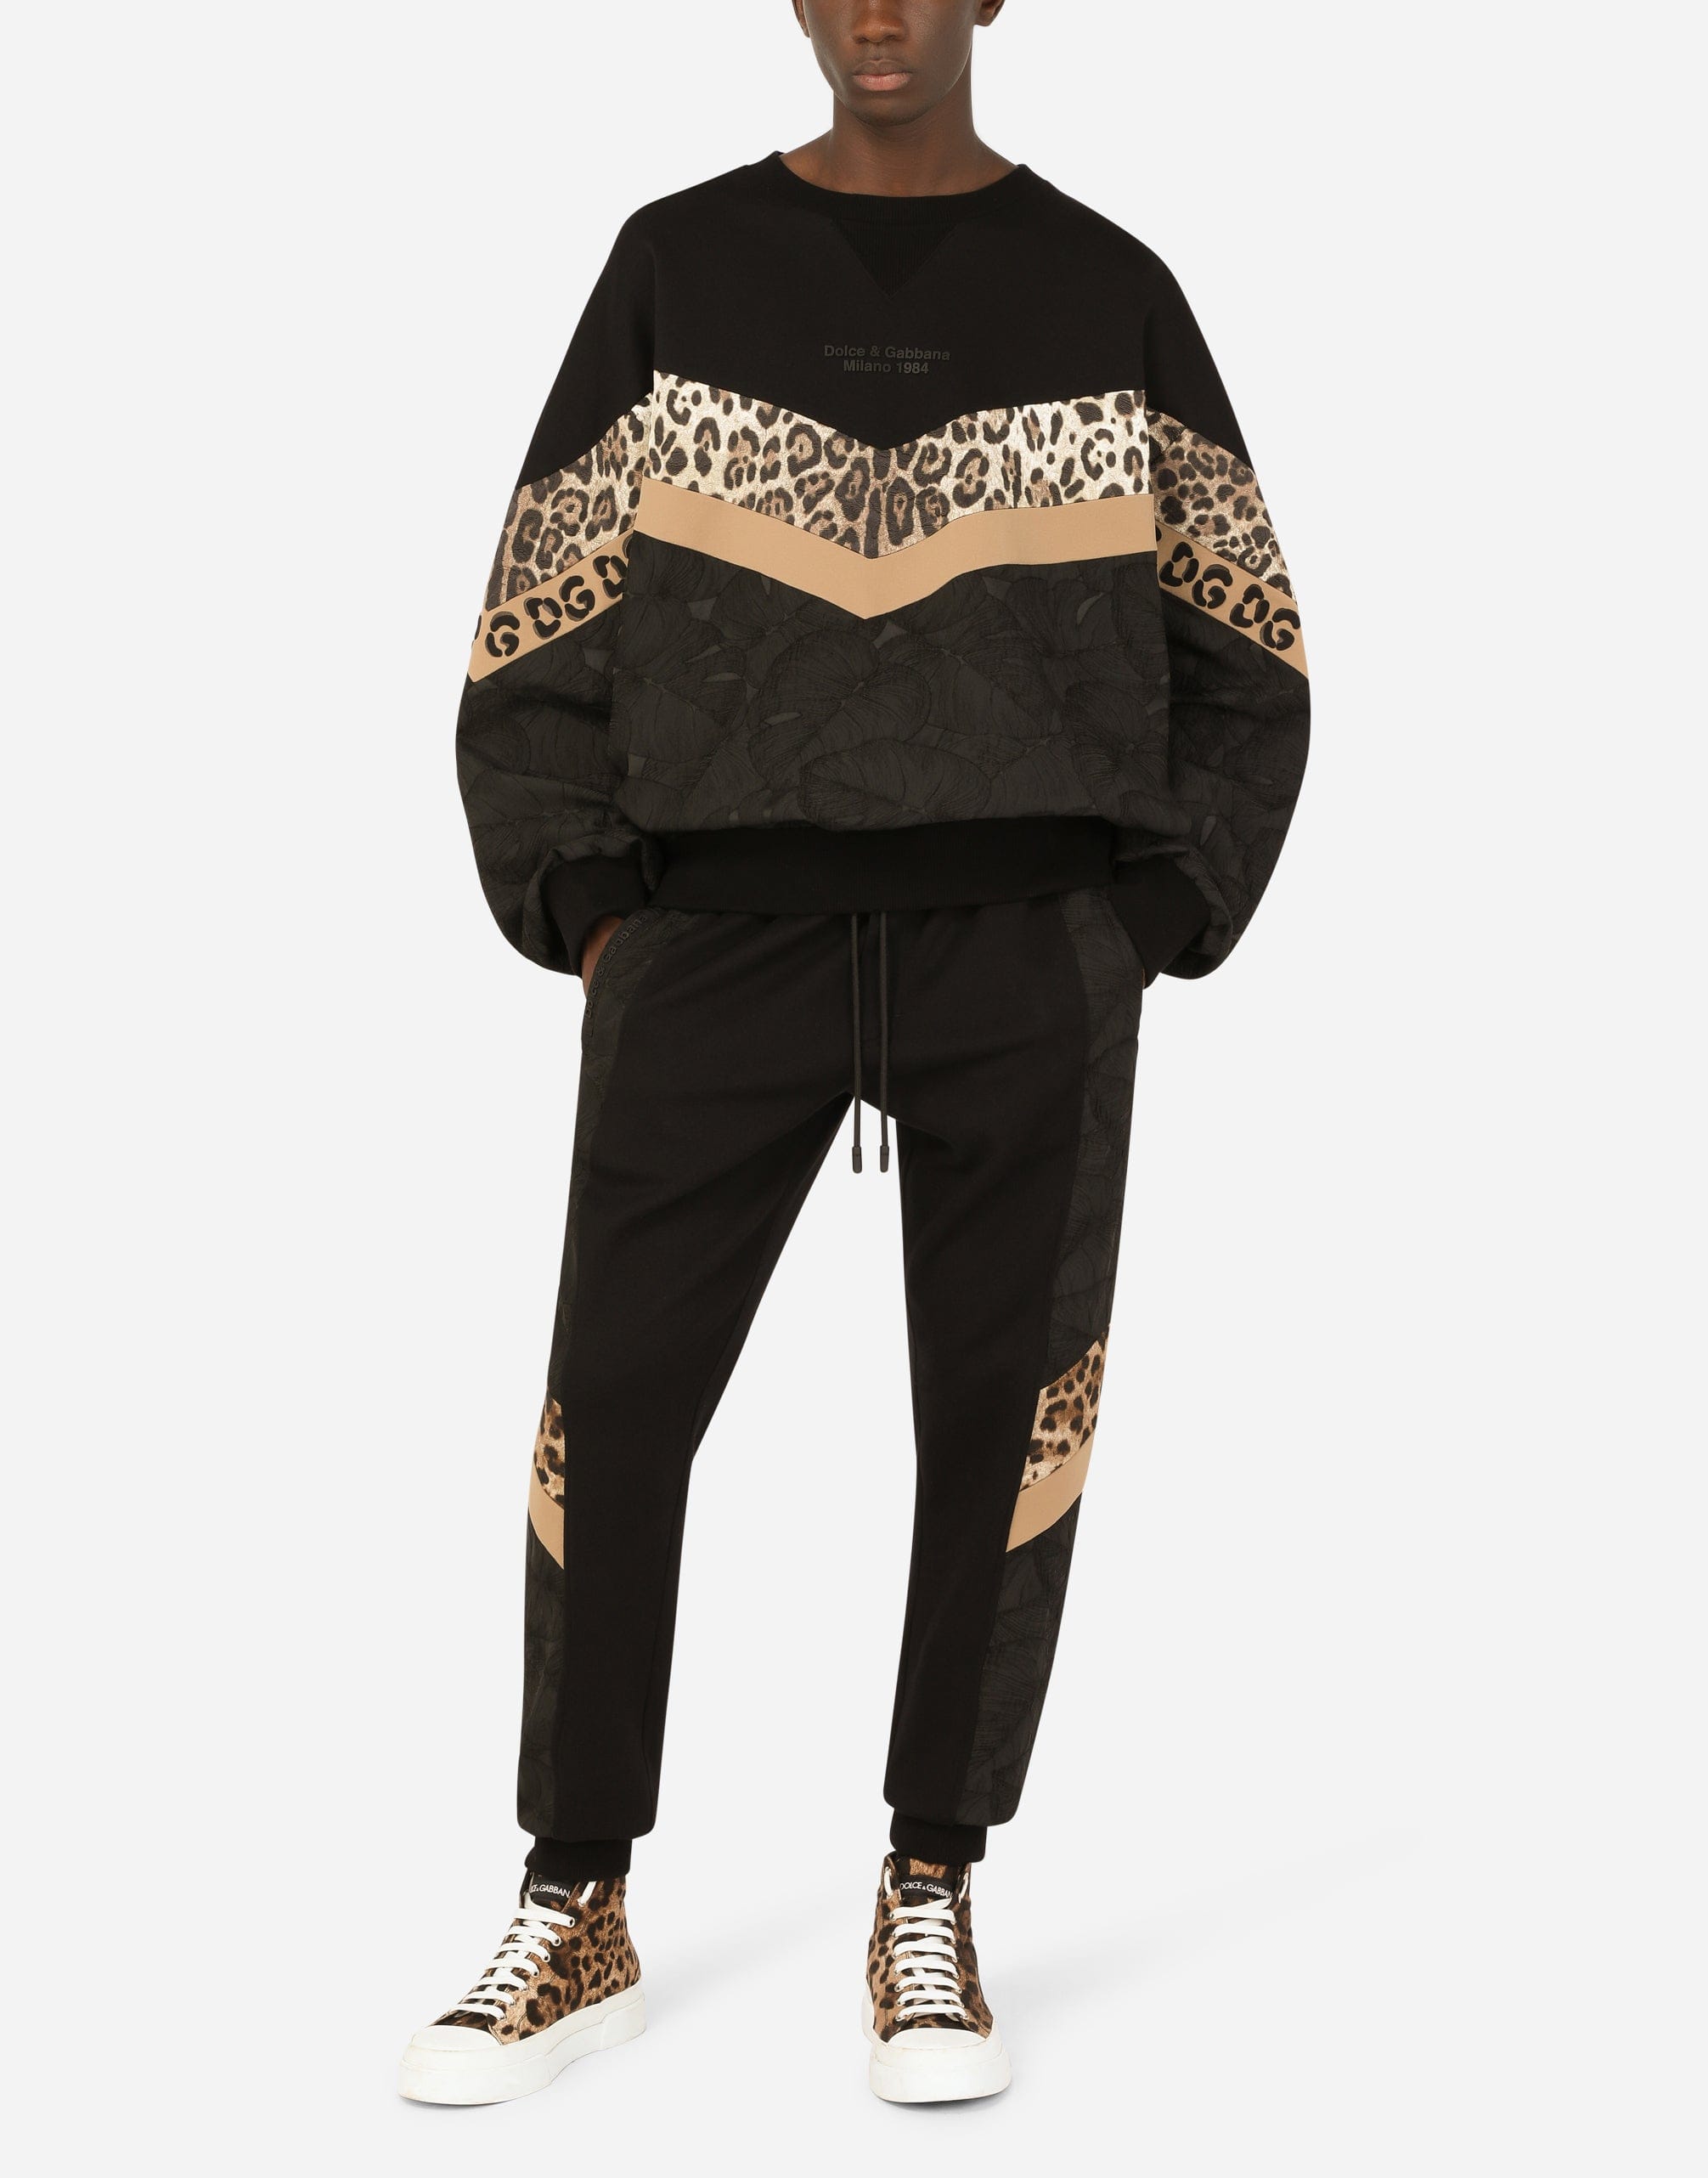 Dolce & Gabbana Mixed-Fabric Jogging Pants With Patch In Animal Print